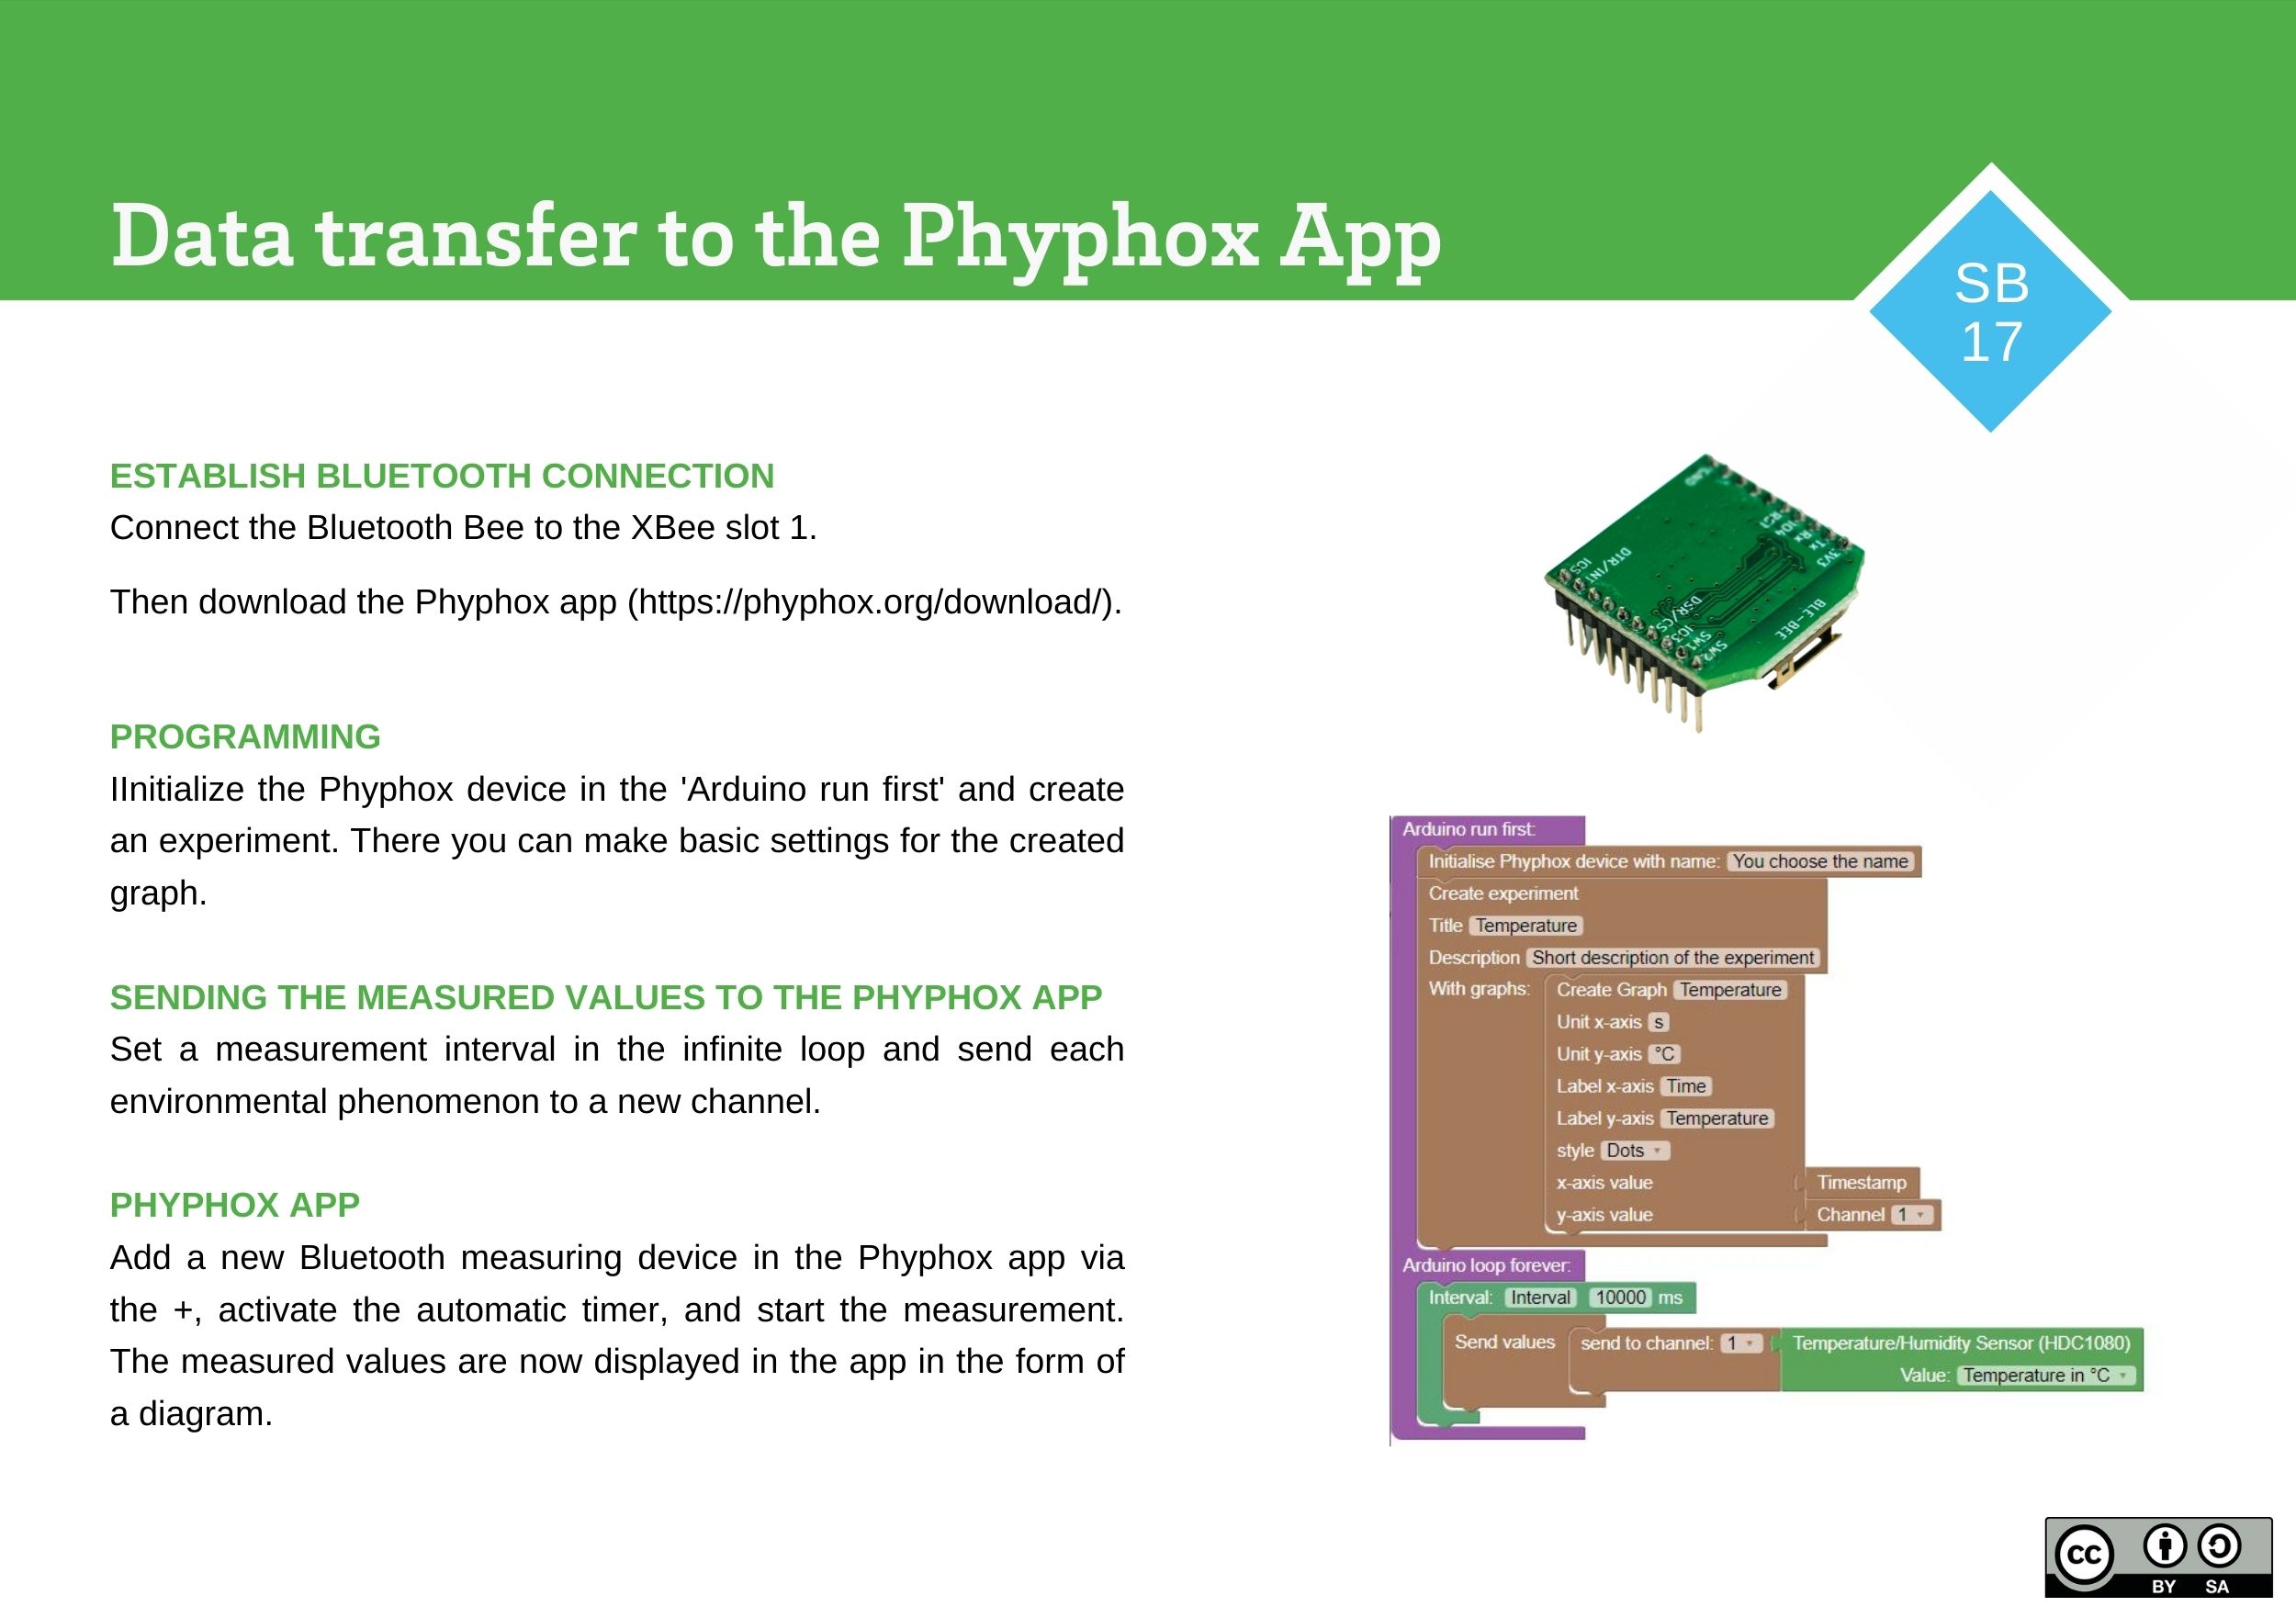 Bluetooth and the Phyphox-App